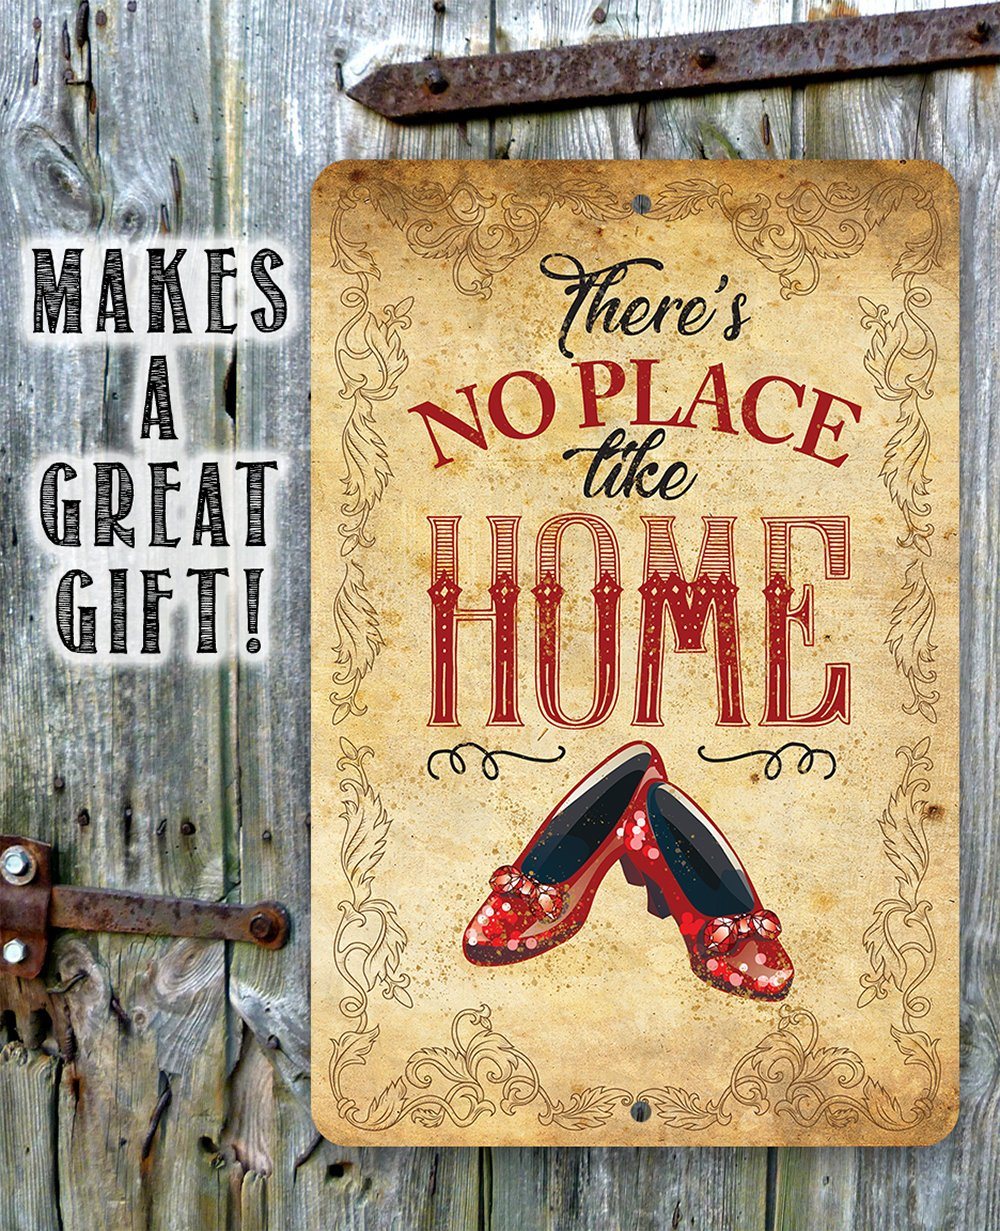 Wizard of Oz -There's No Place Like Home - Metal Sign | Lone Star Art.